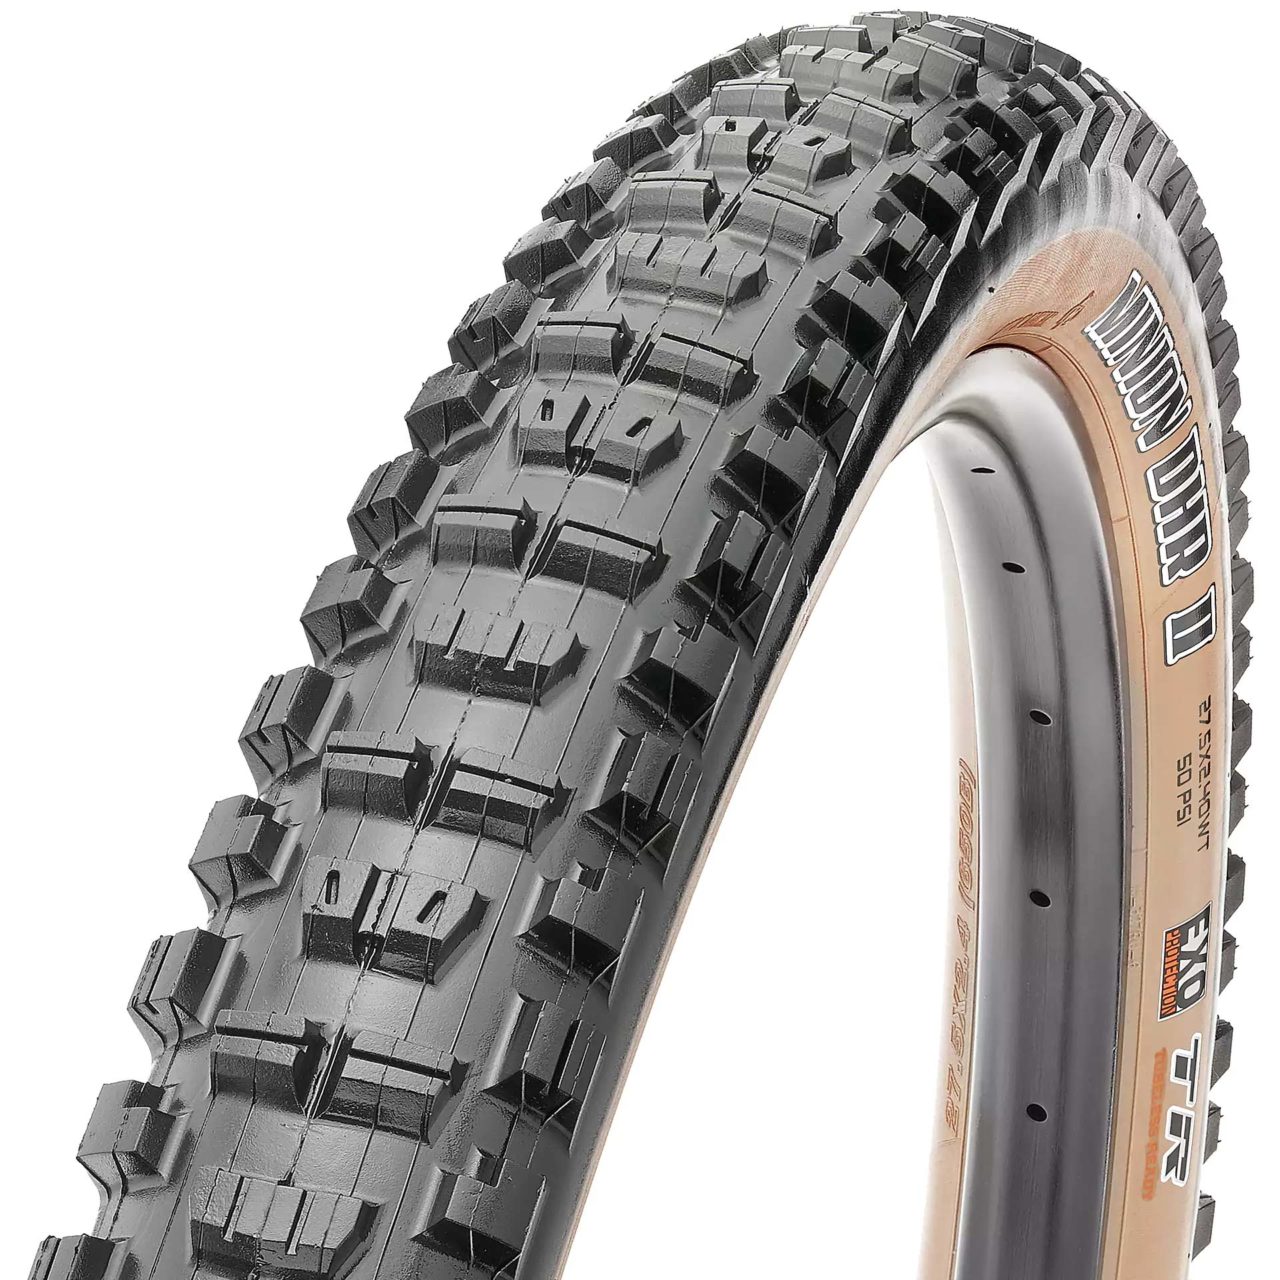 Maxxis Minion DHR II bicycle tire with tan sidewall